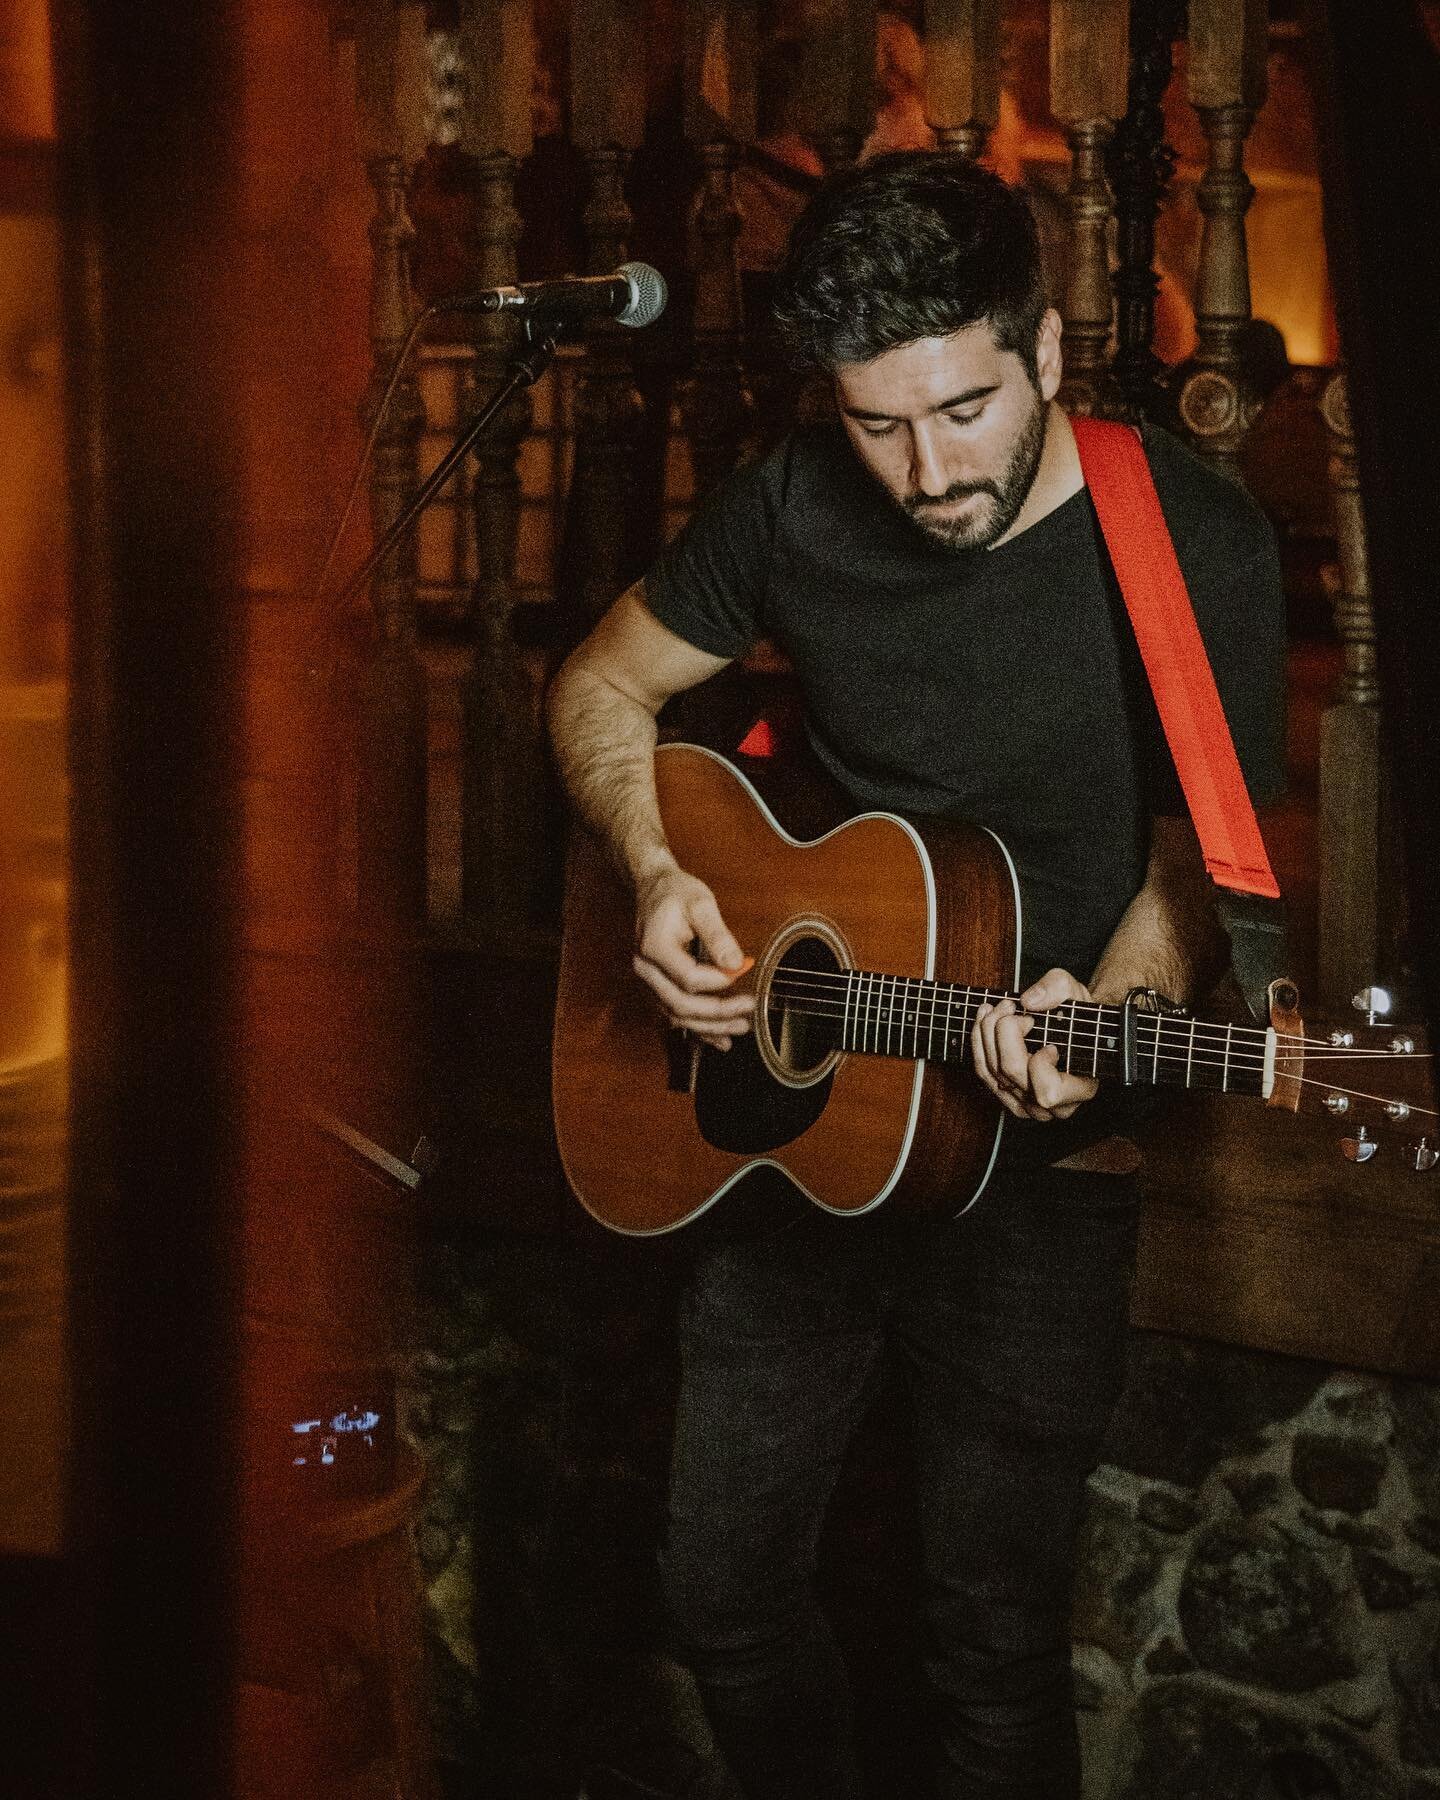 Kicking off this weekends run of gigs in McKendry&rsquo;s tonight at 10pm 😎 Before slingin&rsquo; it with @mojo_ni_ tomorrow evening.. 

You can also catch me in Castle Kitchen on Saturday night too!

Or you can go about your weekend and don&rsquo;t